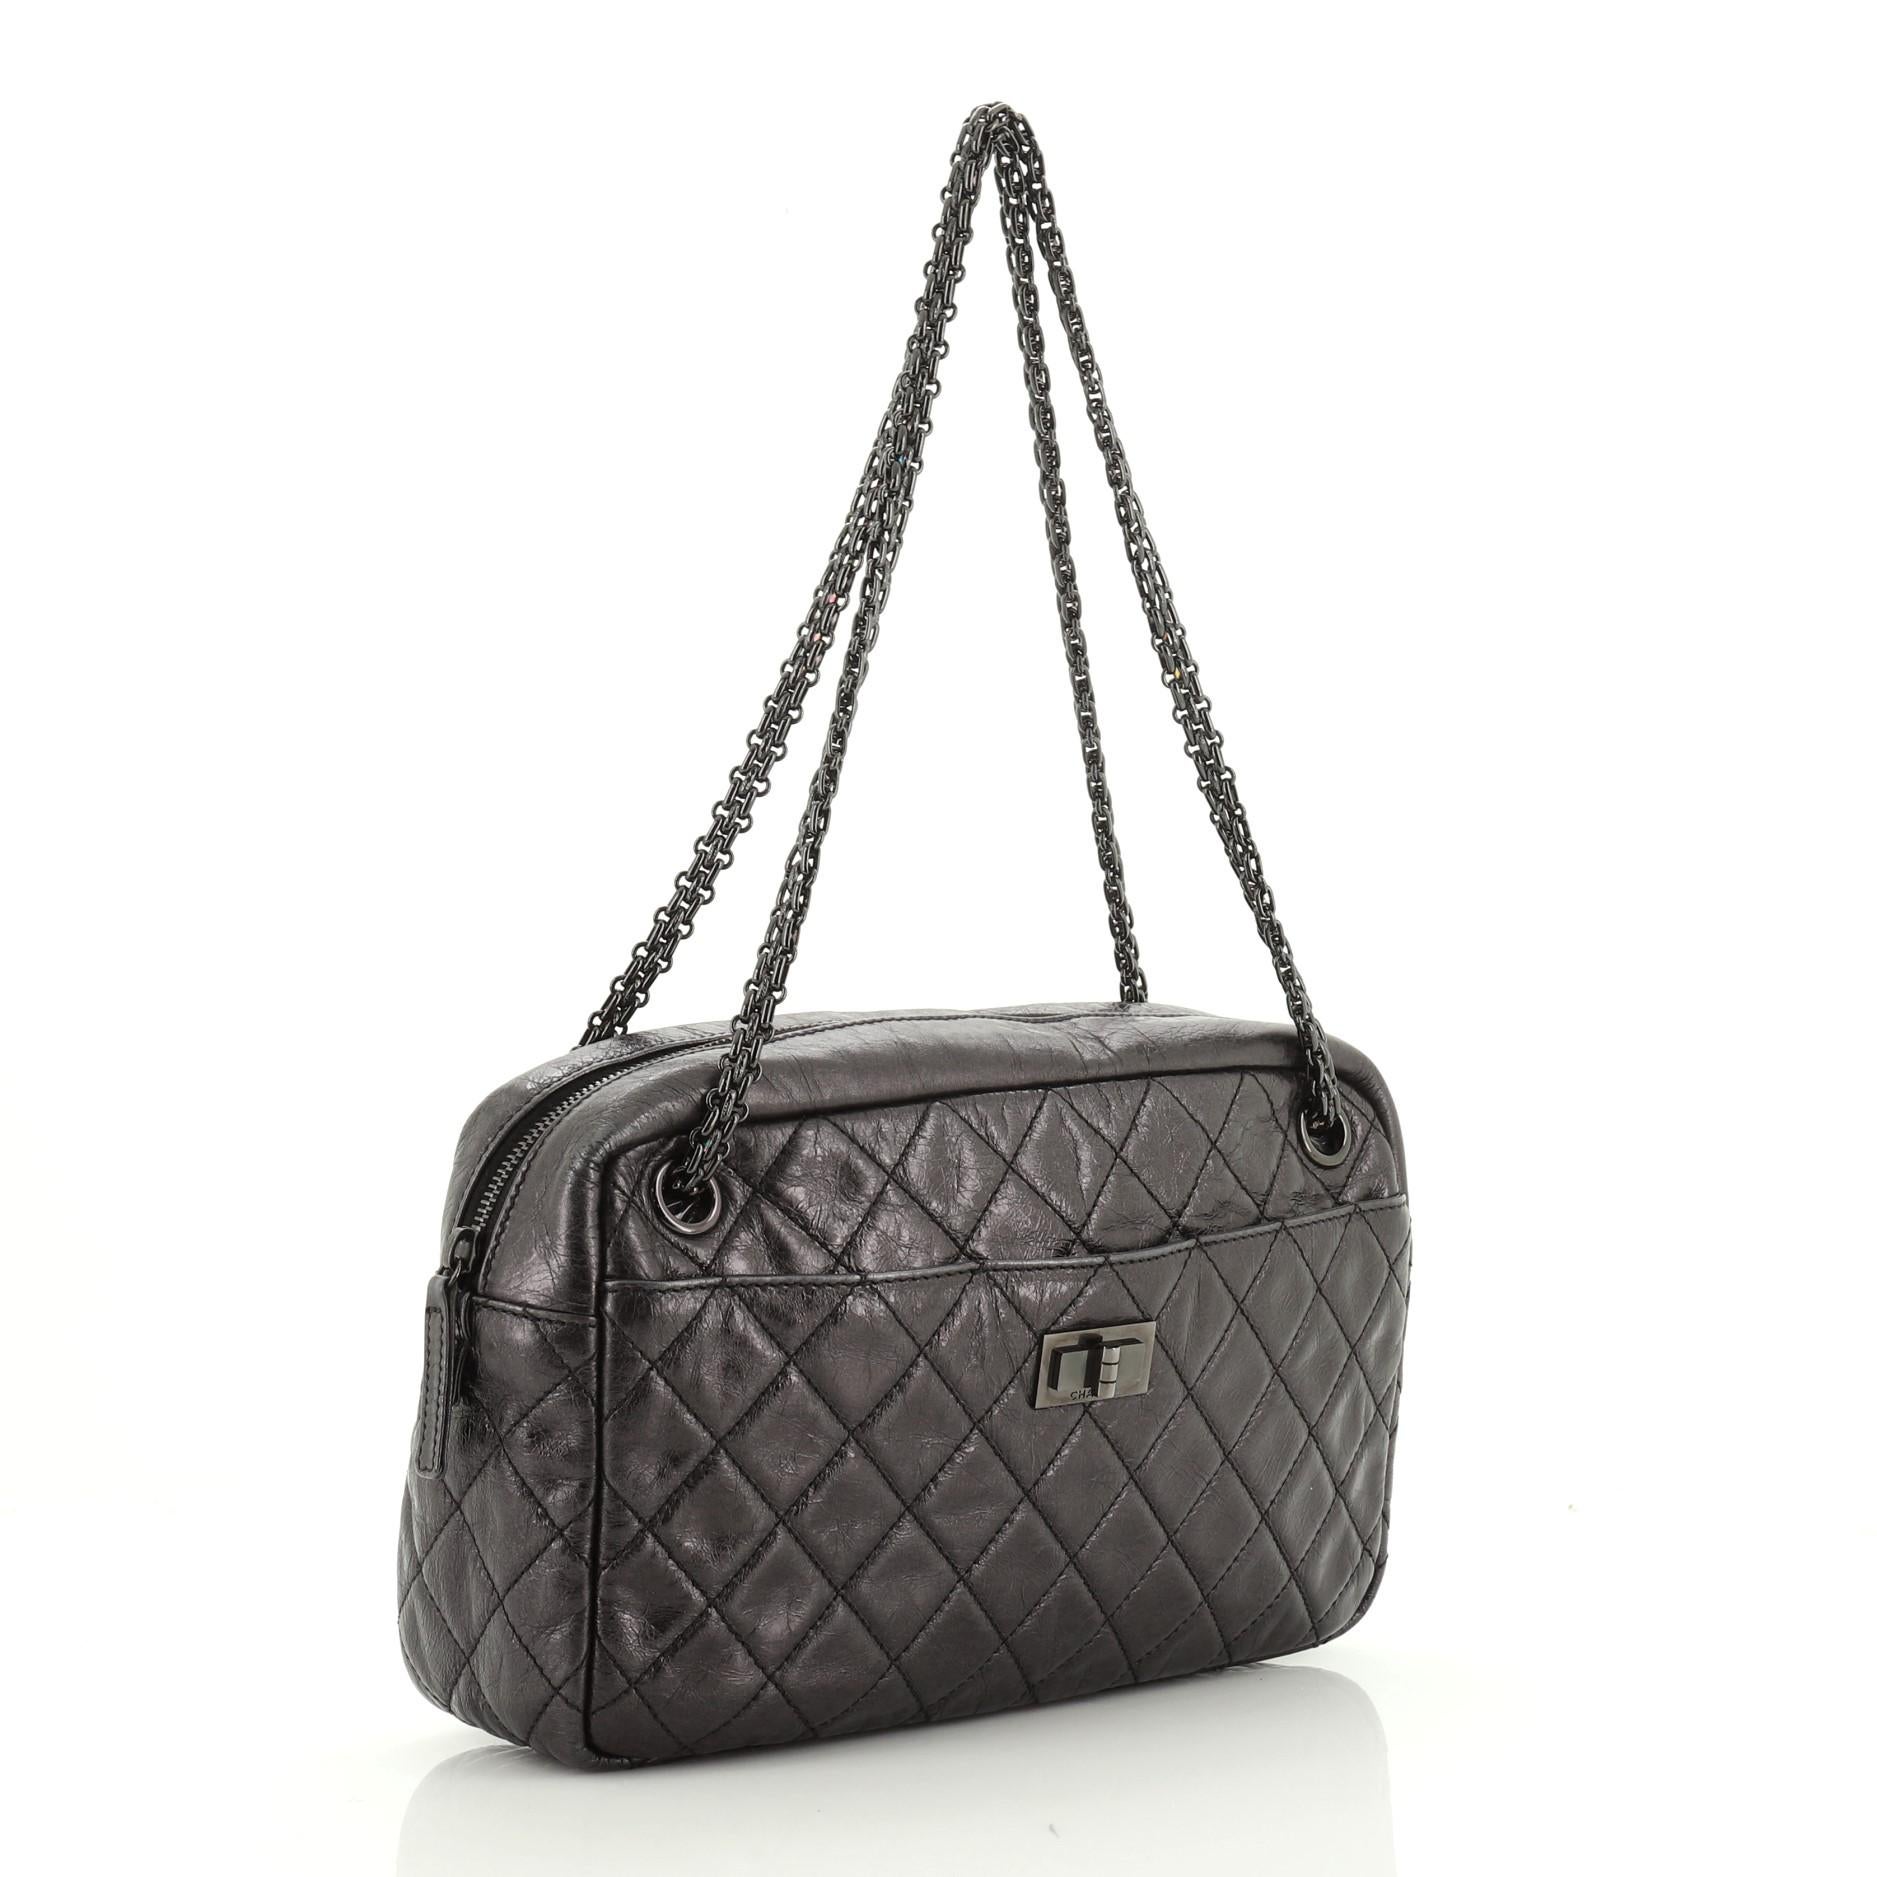 This Chanel Reissue Camera Bag Quilted Aged Calfskin Medium, crafted in black quilted aged calfskin leather, features iconic bijoux chain straps, front pocket with mademoiselle lock closure, exterior back slip pocket and gunmetal-tone hardware. Its